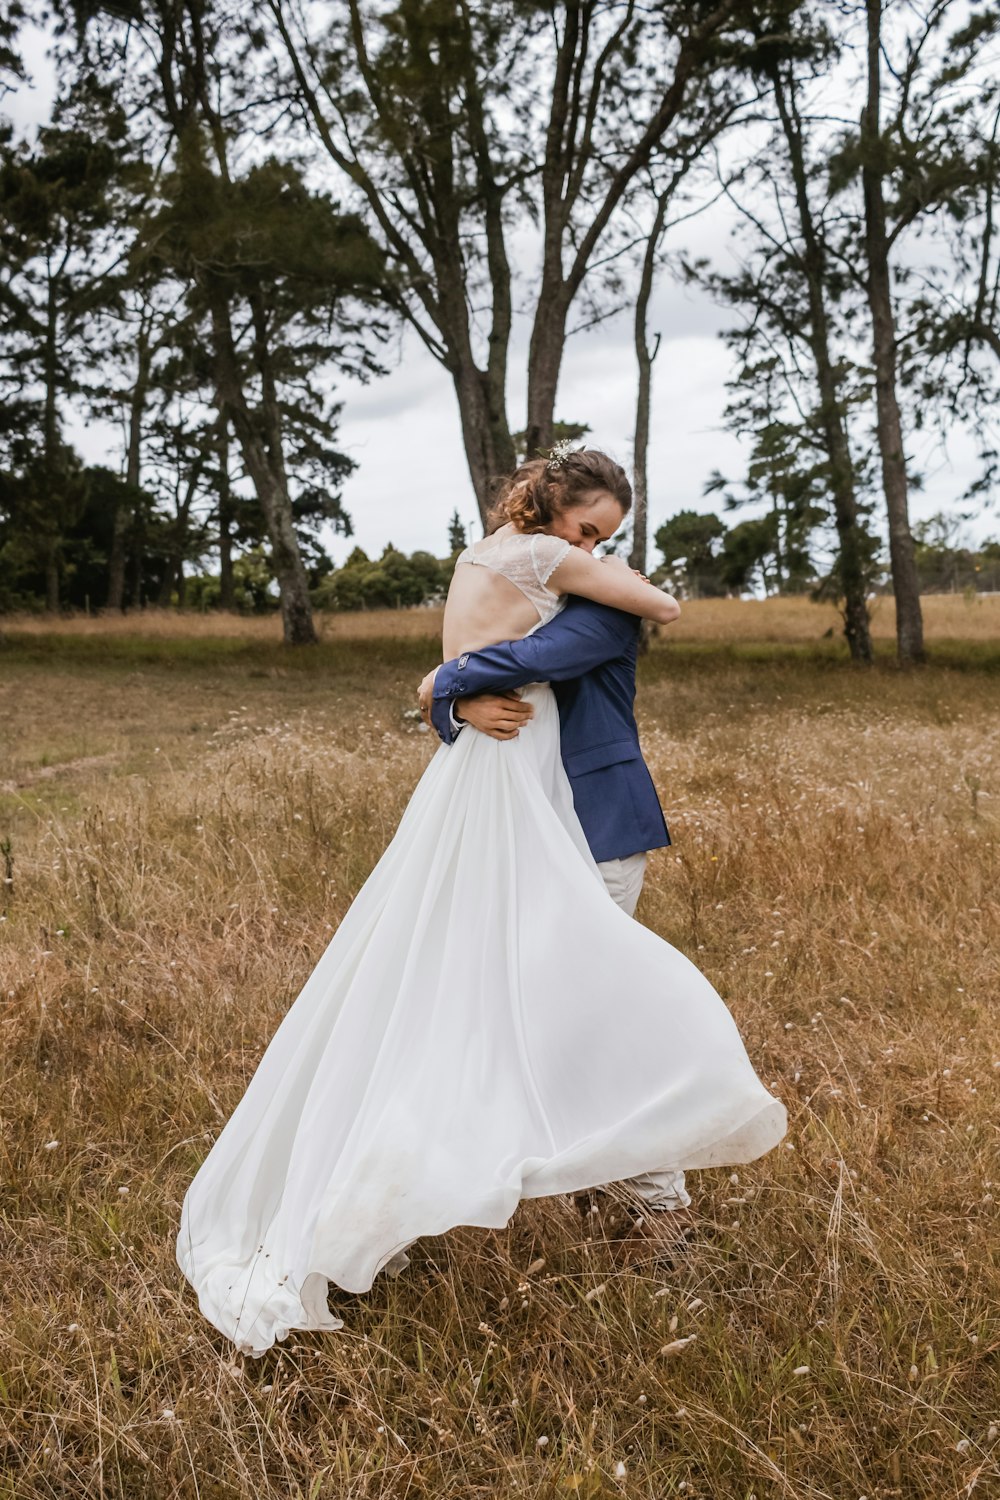 woman and man hugging in the middle of grass field